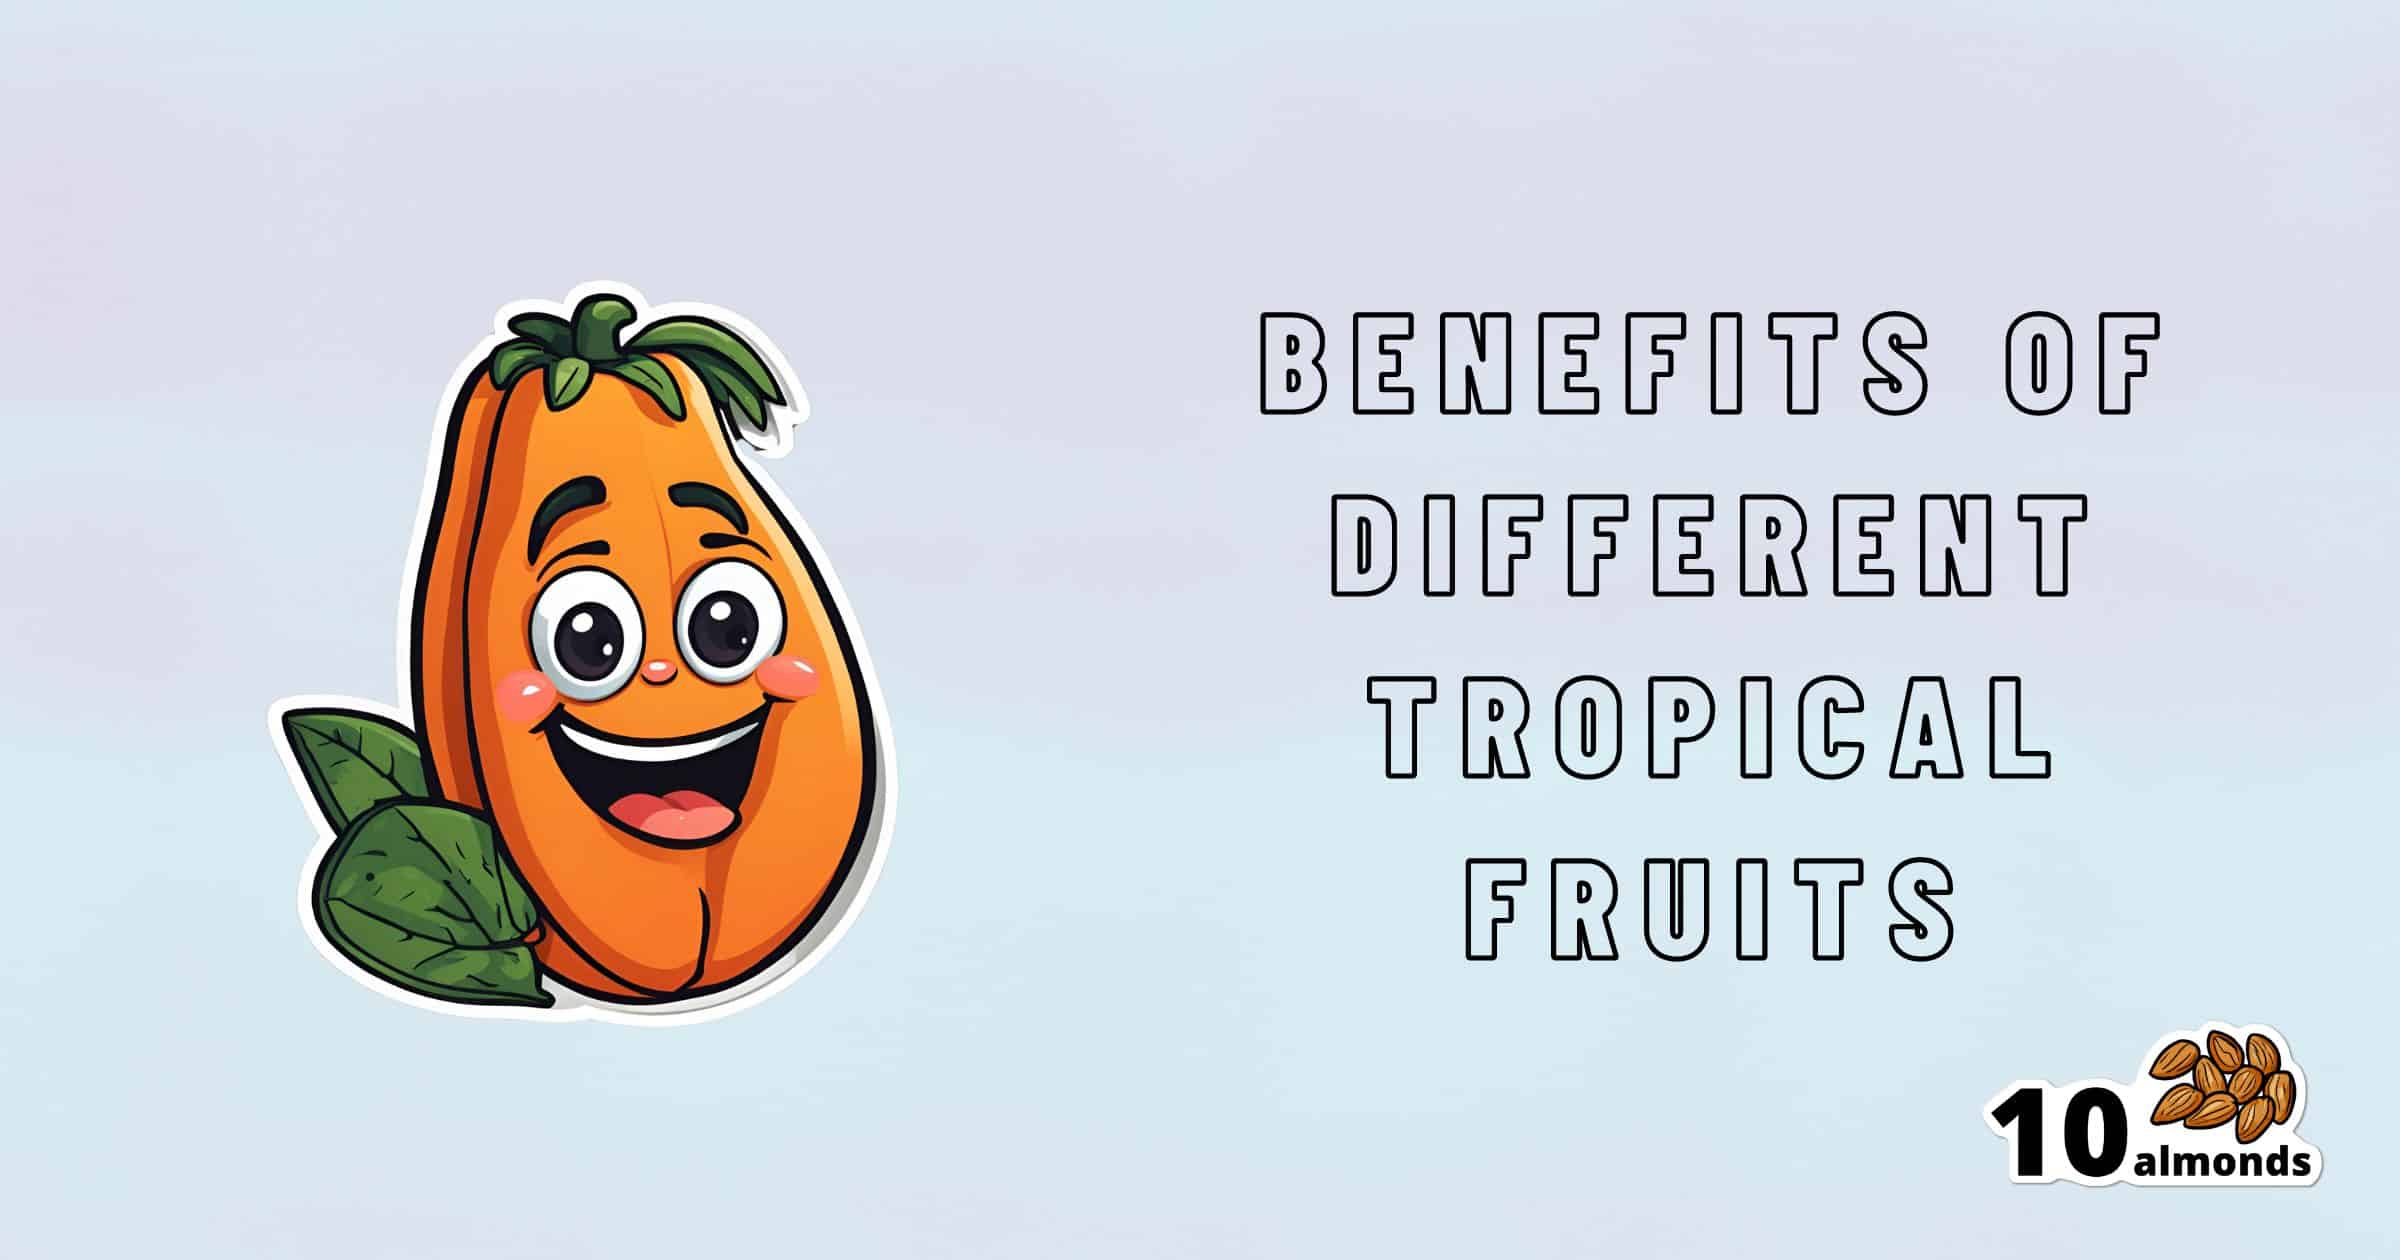 An illustration features a smiling tropical fruit with green leaves, positioned to the left. On the right, text reads "Benefits of Different Tropical Fruits." The bottom right corner displays a logo with "10 almonds" and an image of almonds, emphasizing the wholesome benefits these different fruits provide.